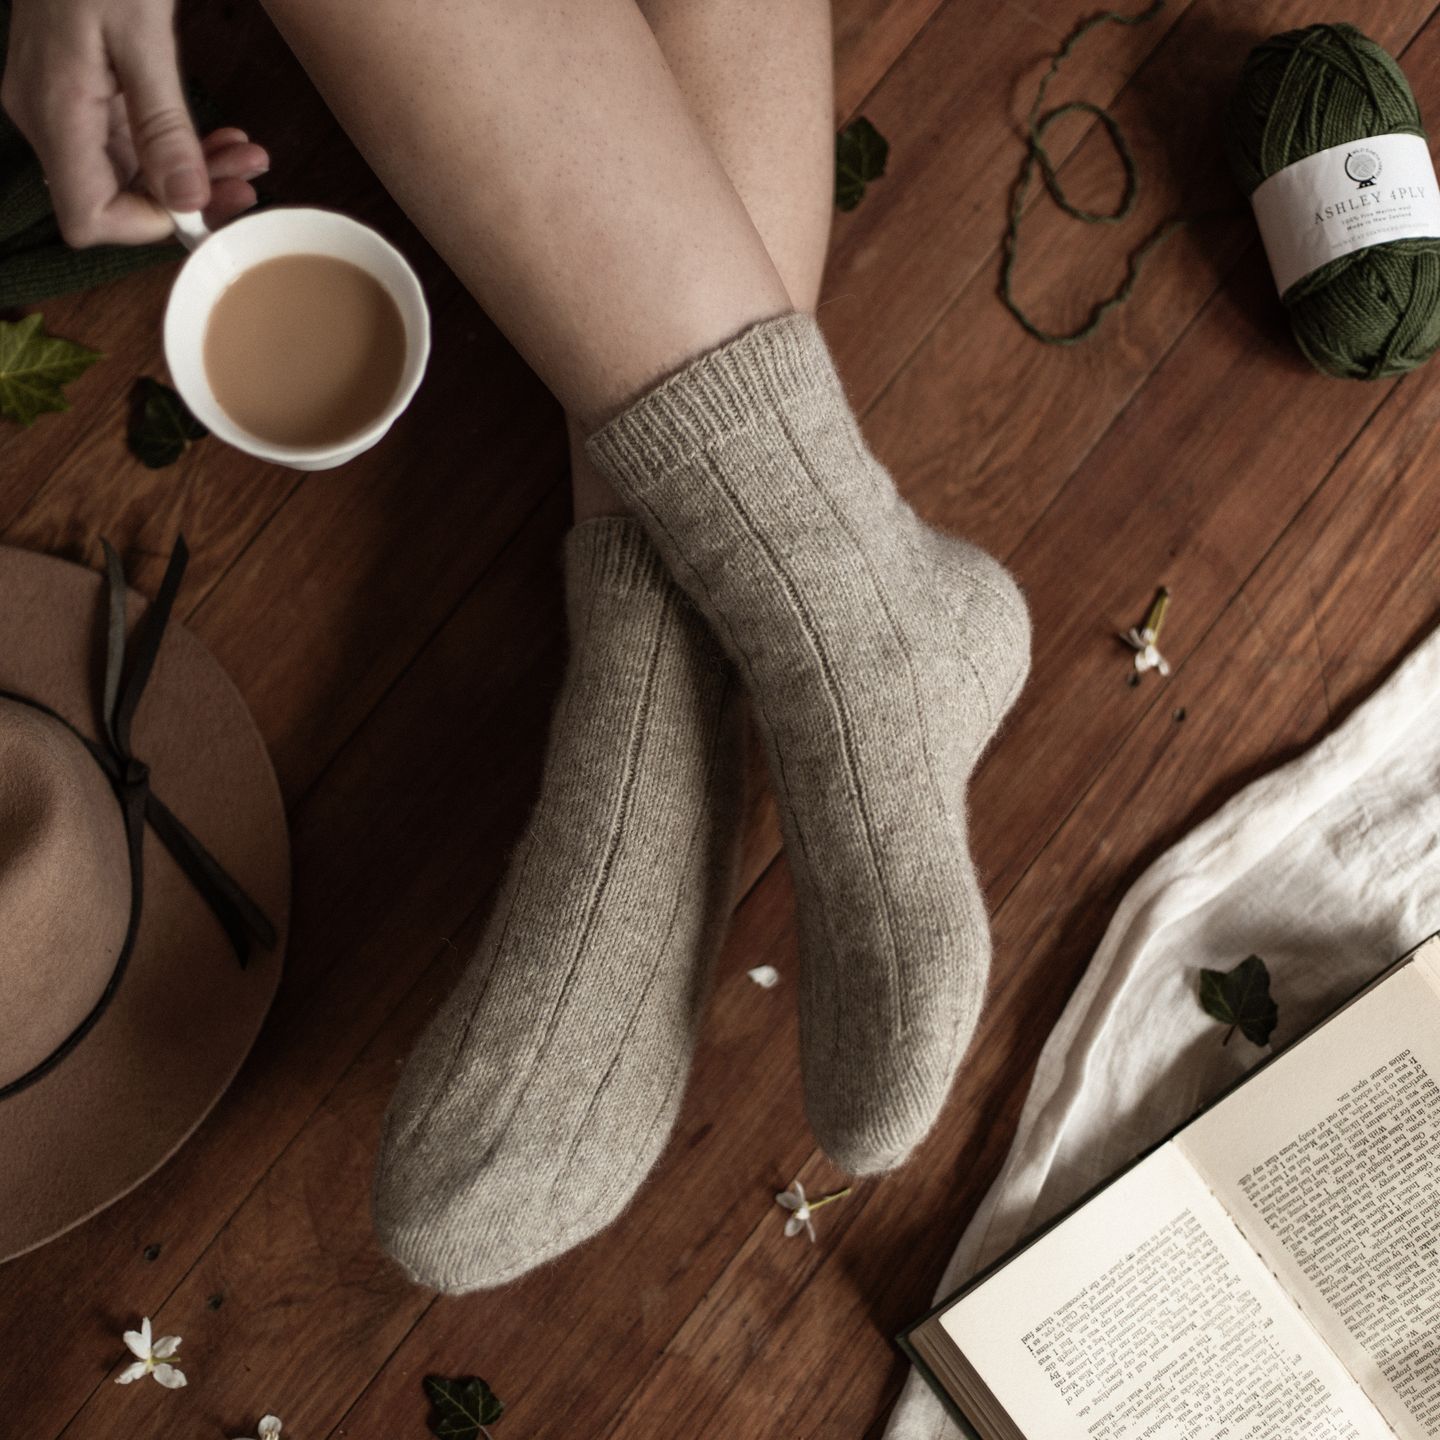 Wearing handknit socks with legs crossed on a wooden floor. Holding a cup of tea.